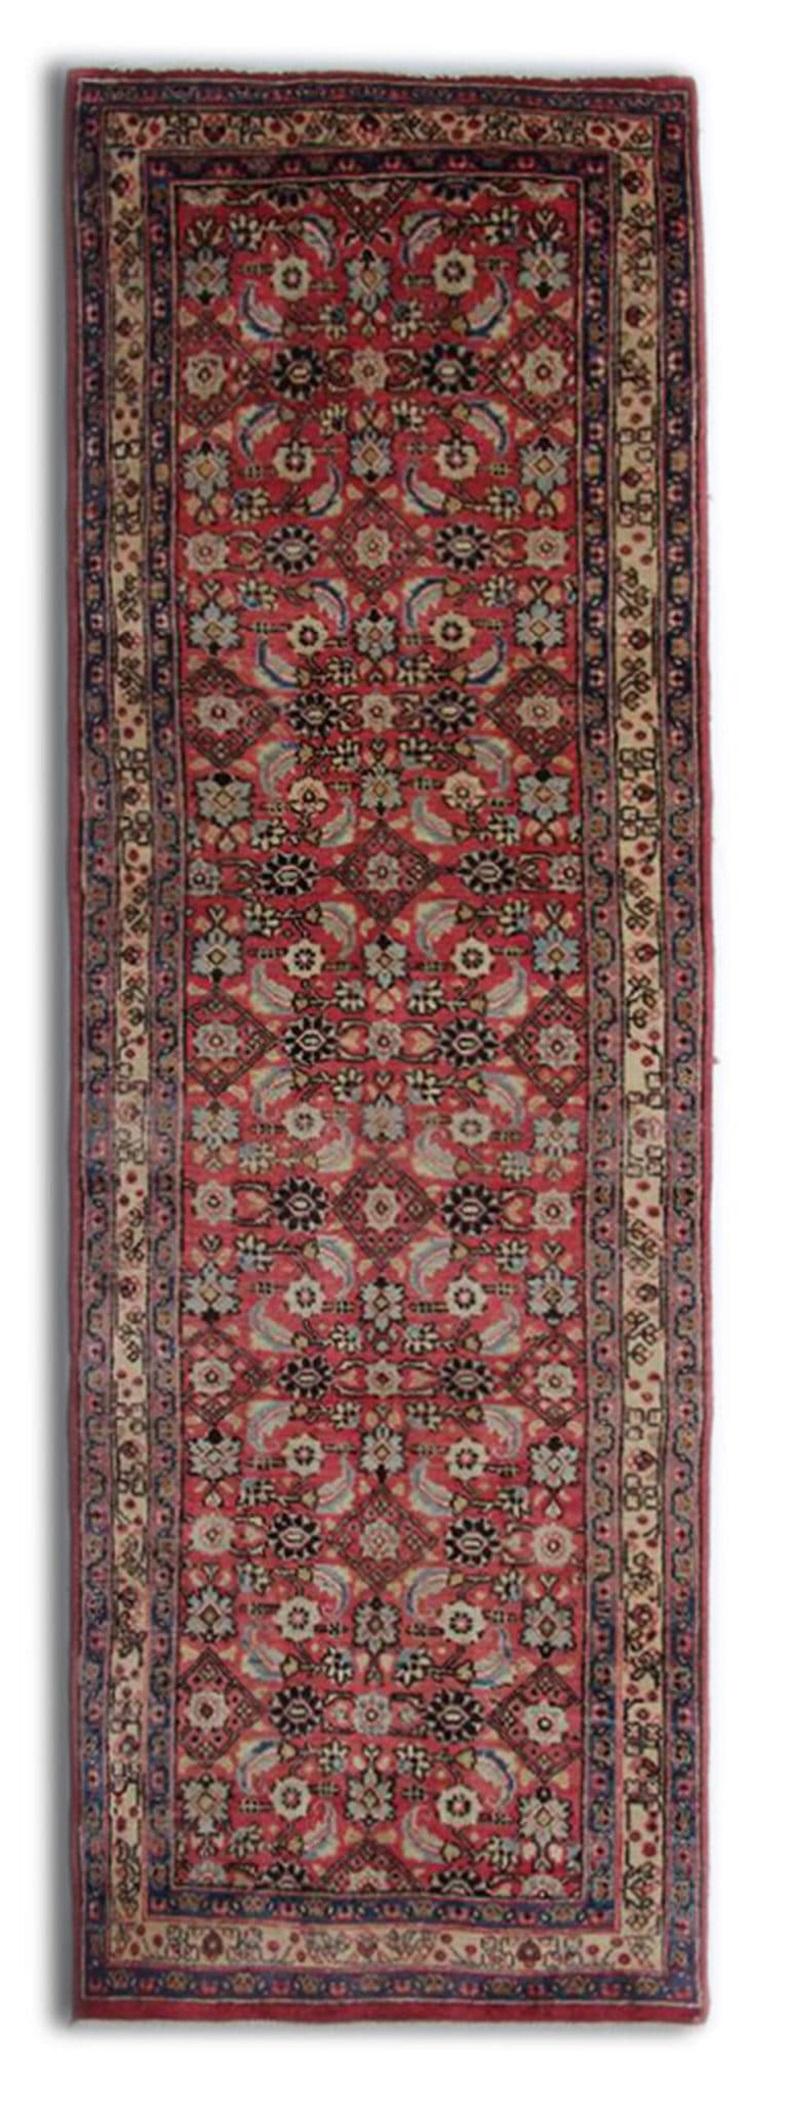 Vintage Hussein Abad Runner Rug, Rust Stair Runner, Wool Rug In Excellent Condition For Sale In Hampshire, GB